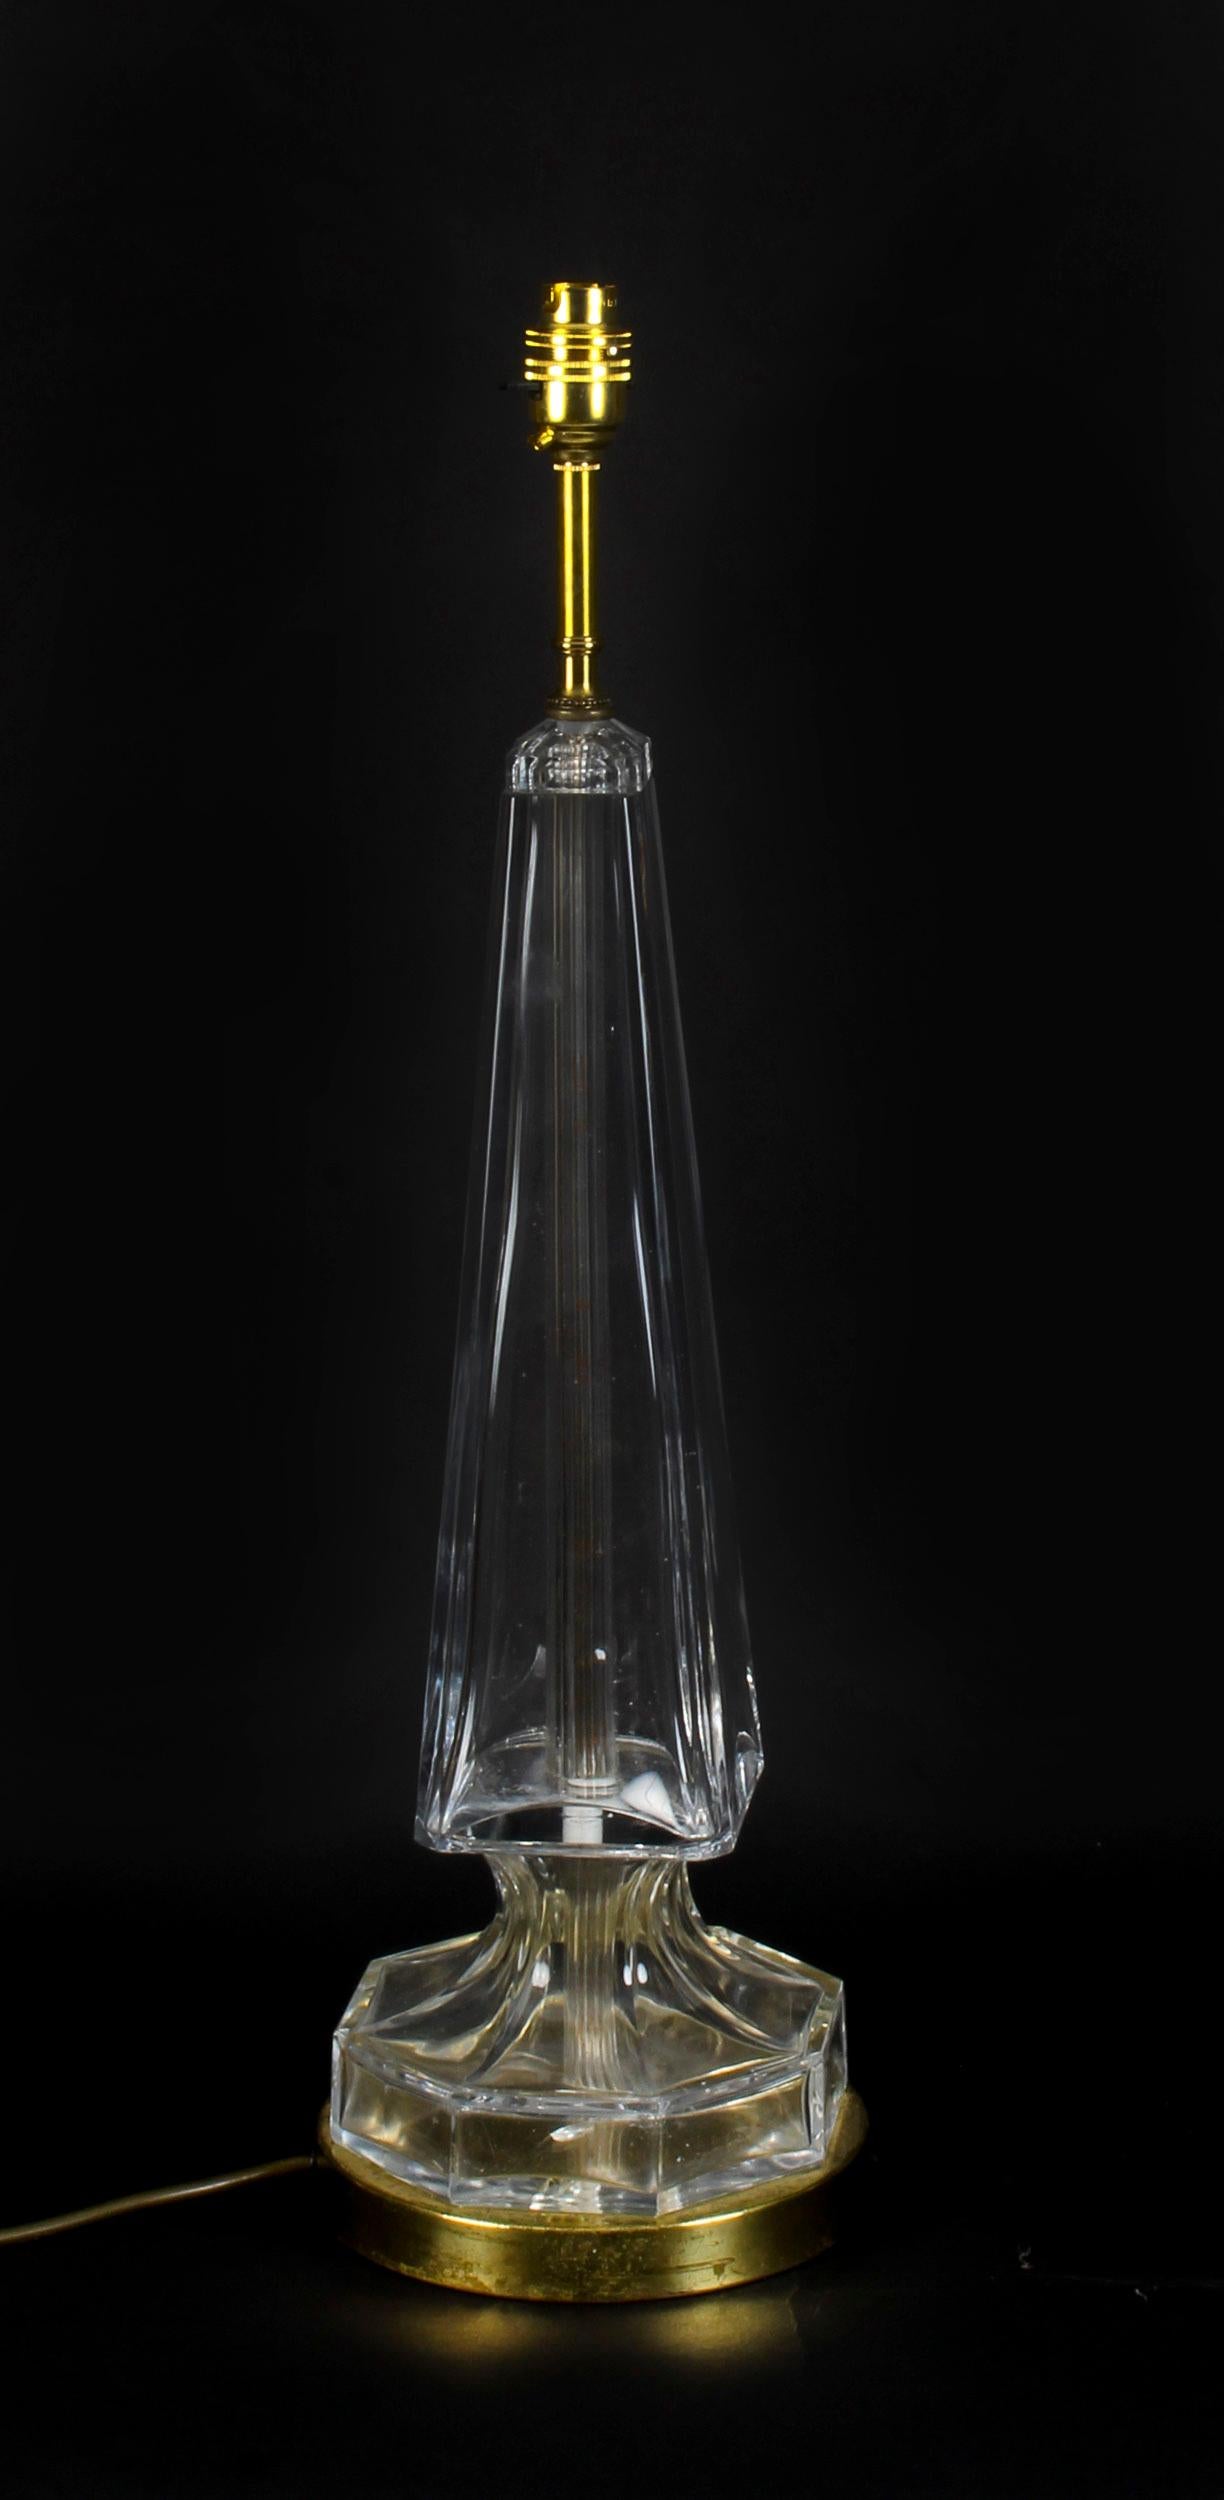 This is a fashionably elegant and sophisticated vintage glass and brass table lamp, dating from the mid-20th century.

This stylish lamp has a striking obelisk shape featuring a distinctive tall and narrow tapering four-side glass body terminating